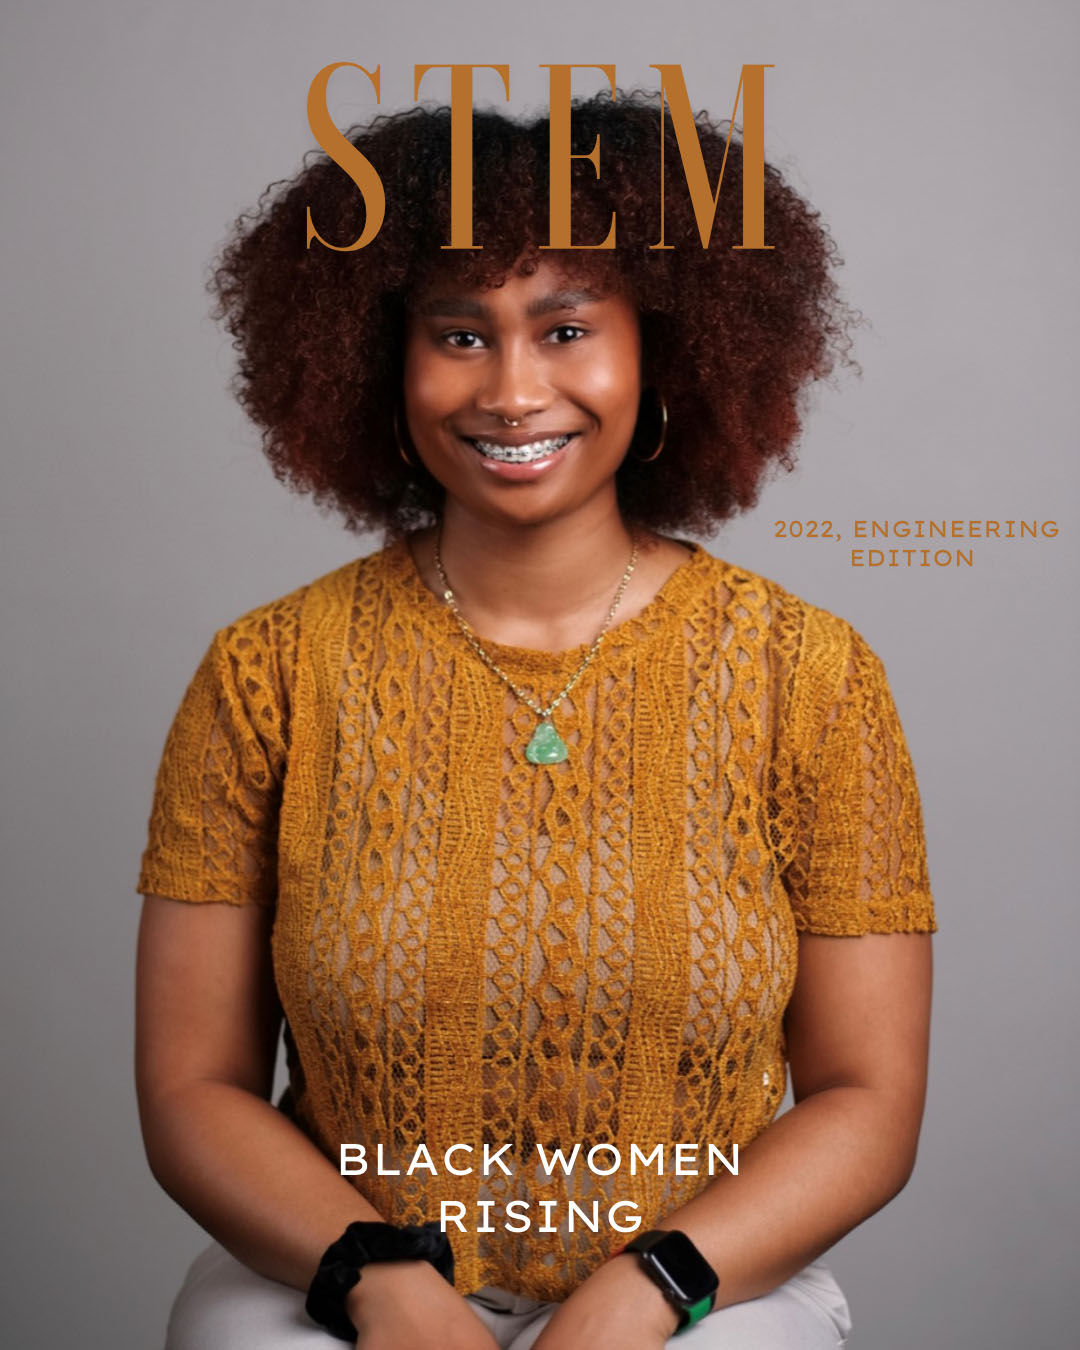 Woman smiling on the cover of the second issue of STEM Mag.